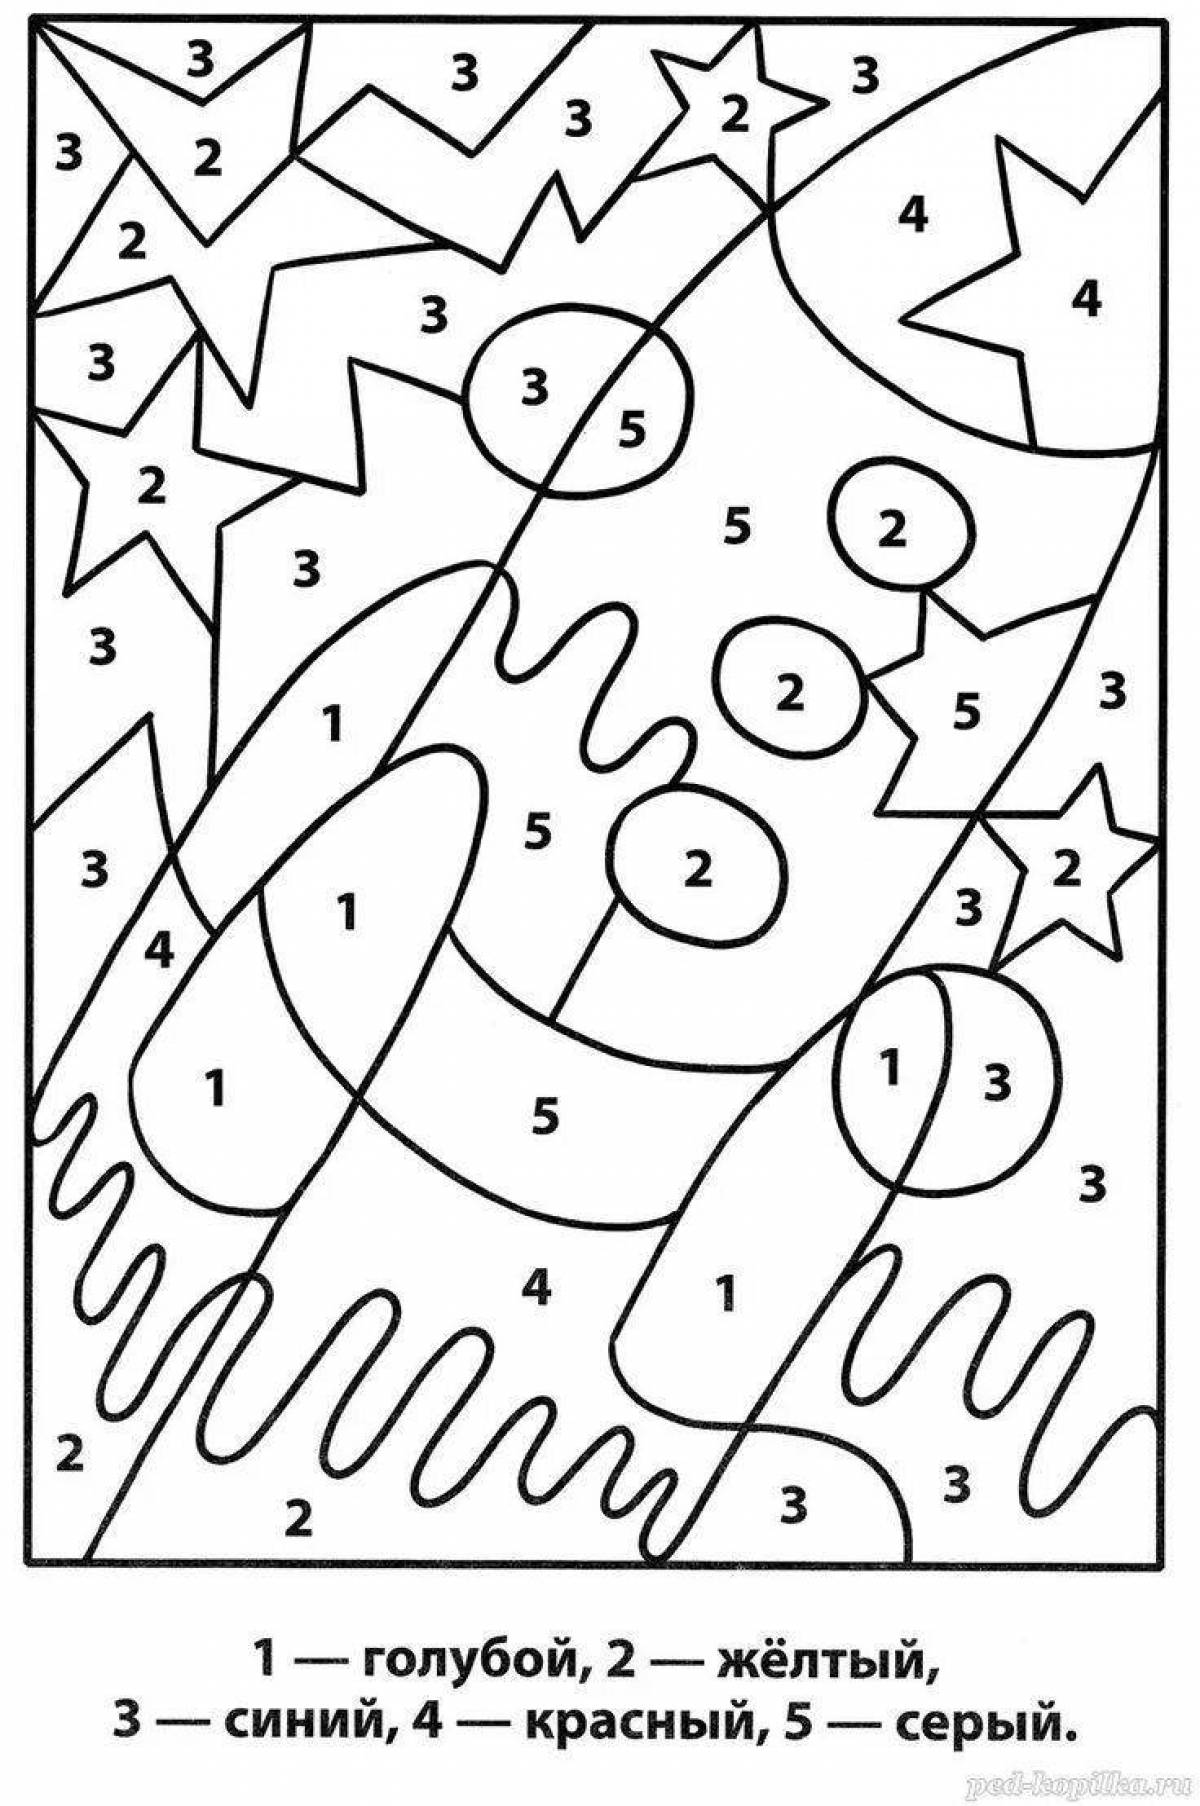 Stimulating coloring by numbers for boys 5-6 years old